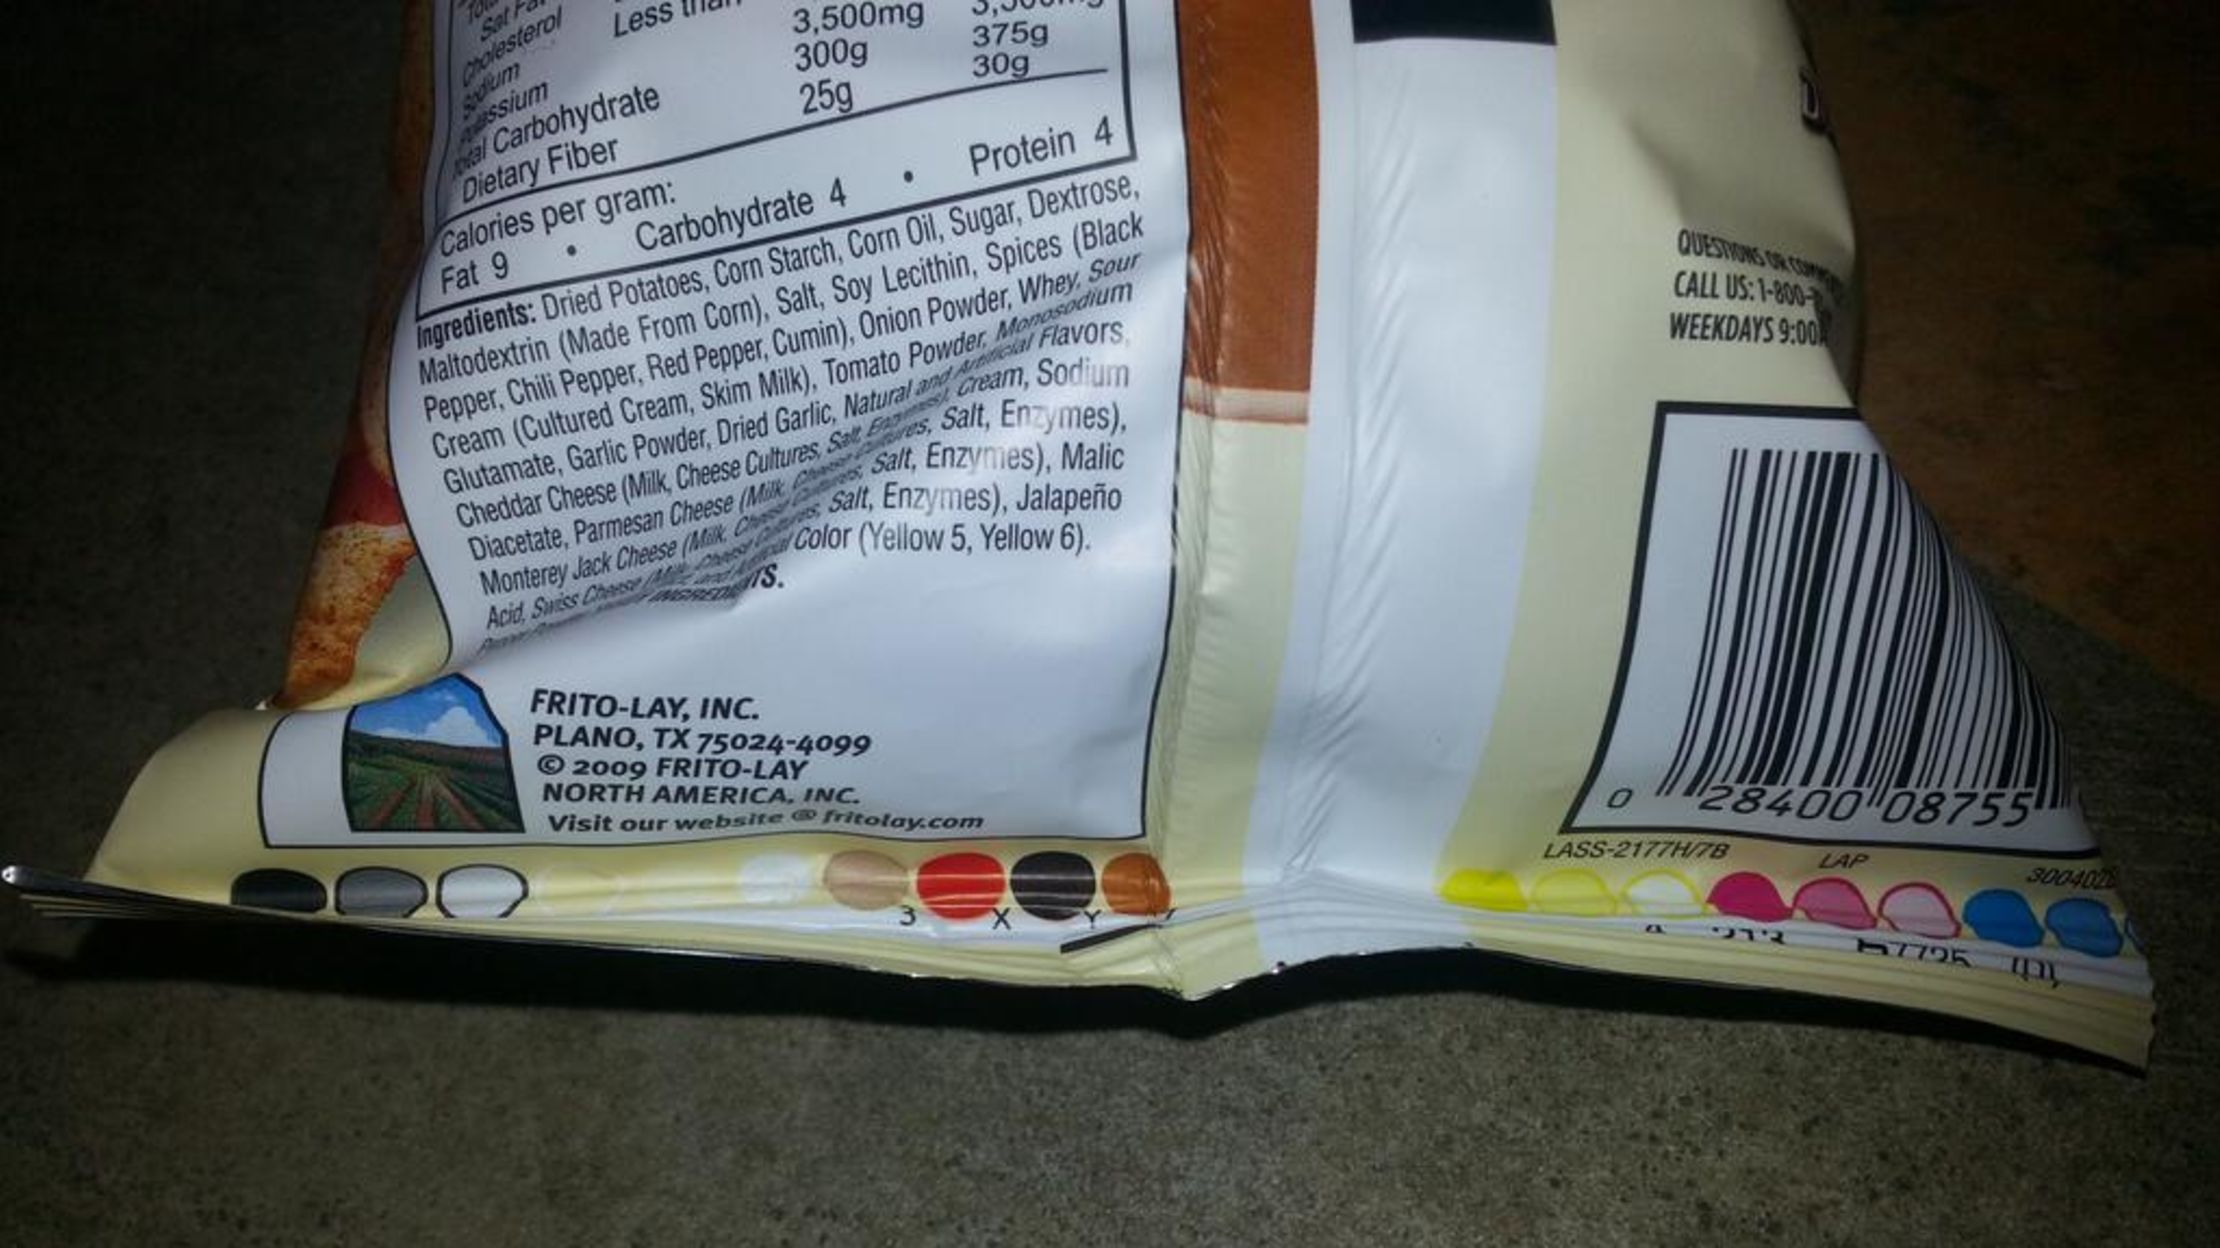 What Are The Colored Circles on Food Packages? | Mental Floss